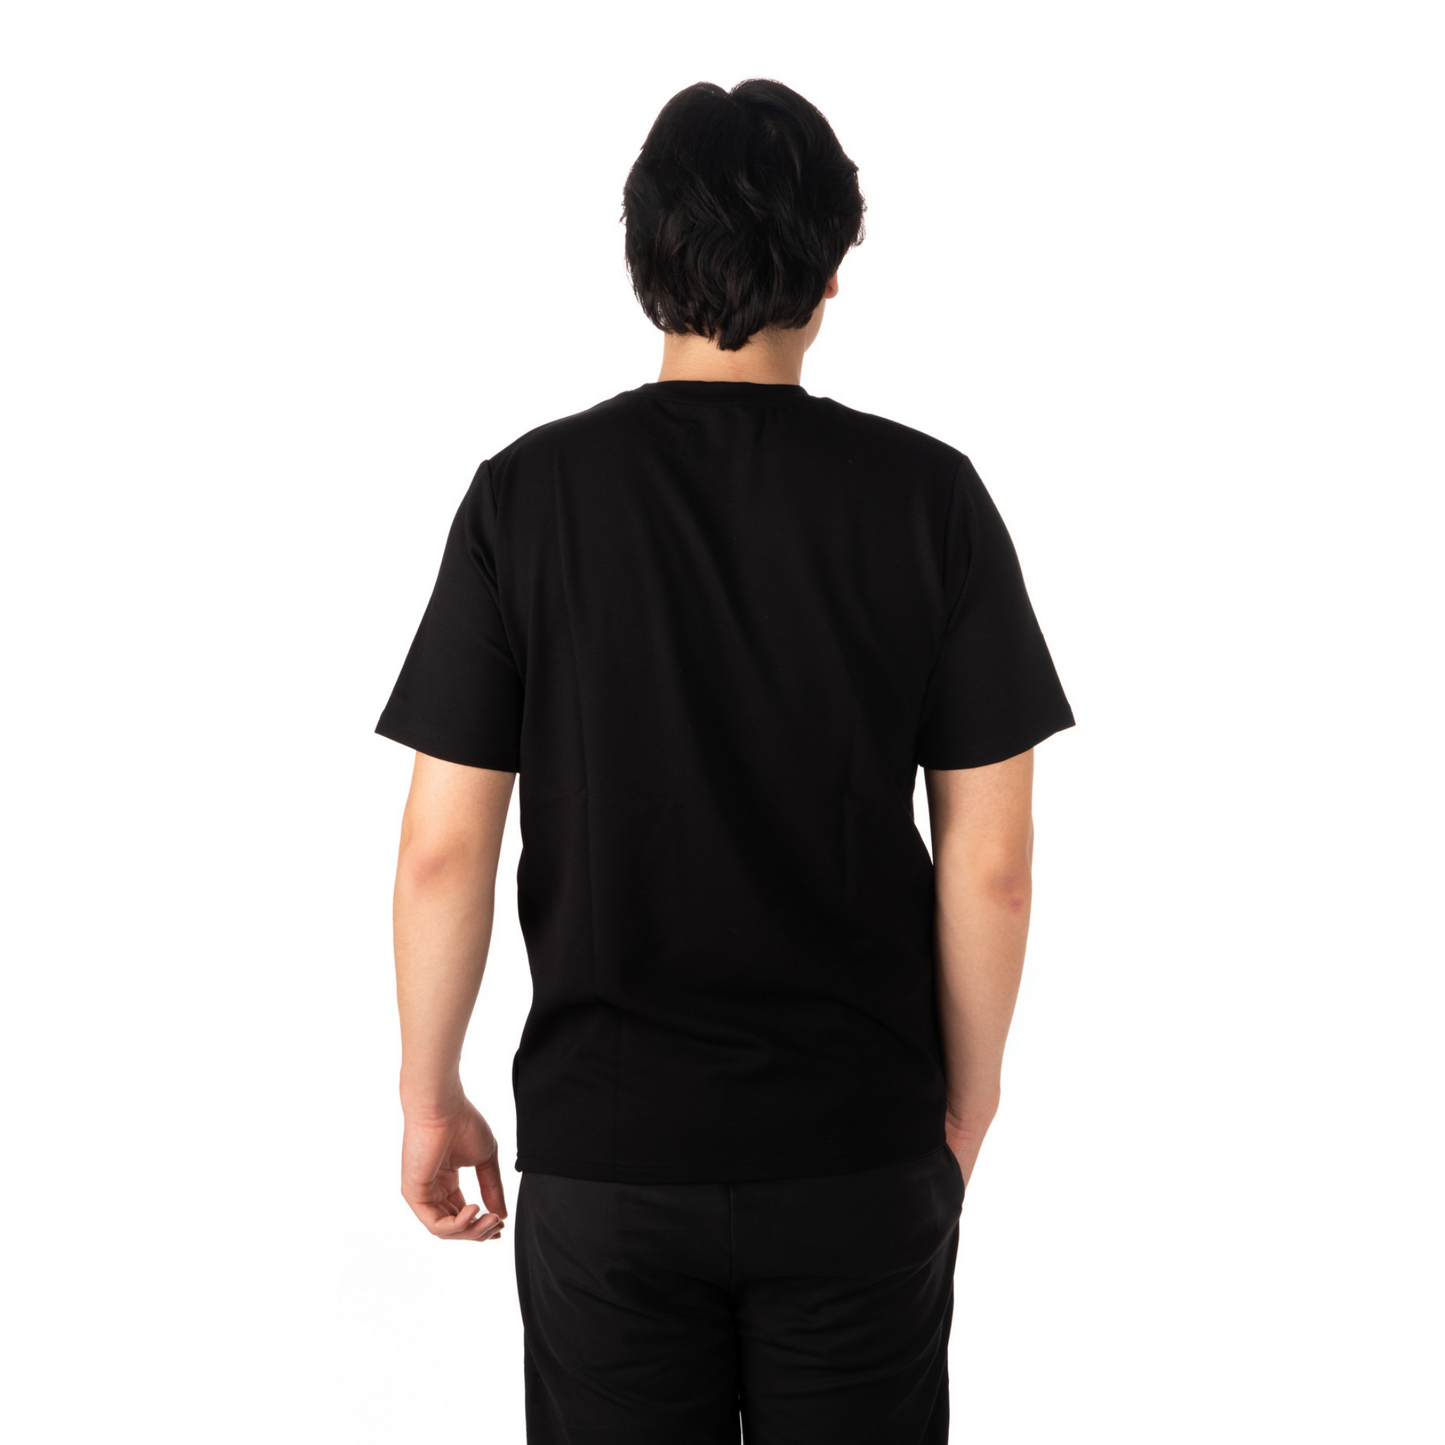 L’Homme Moderne Black T-shirt with Mint Smiley back view on male model